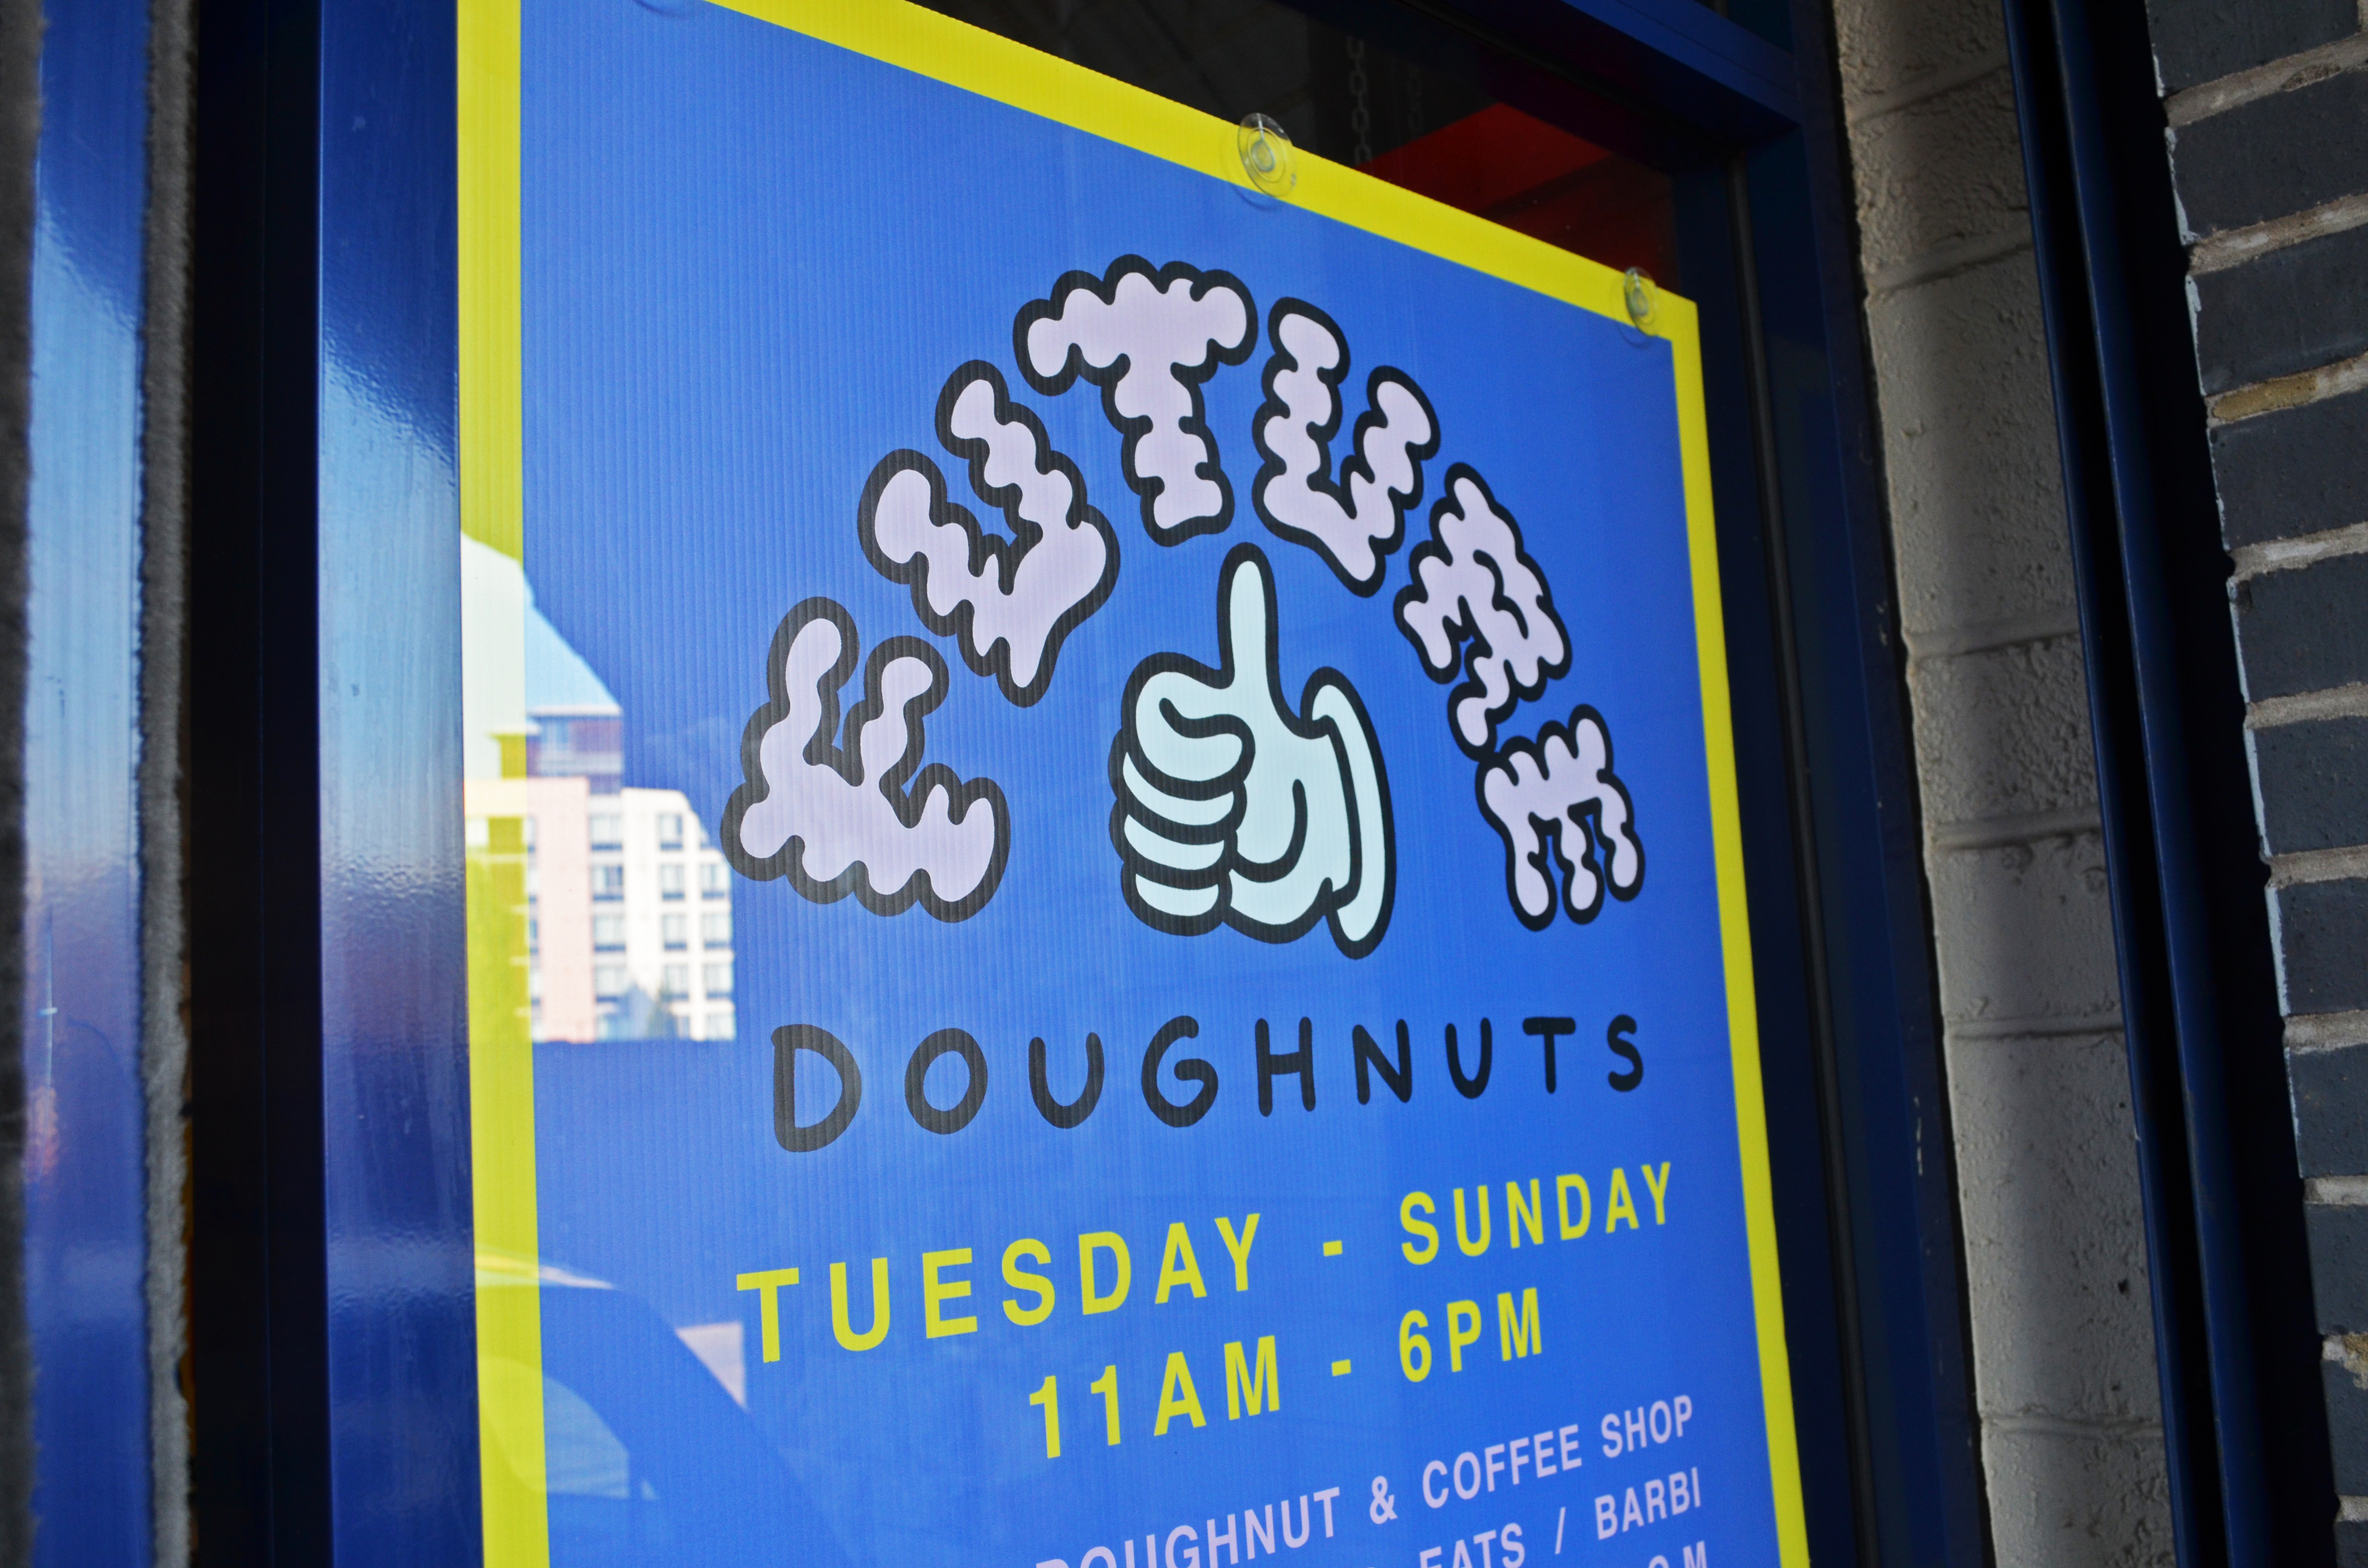 Future Doughnuts store sign with logo and hours